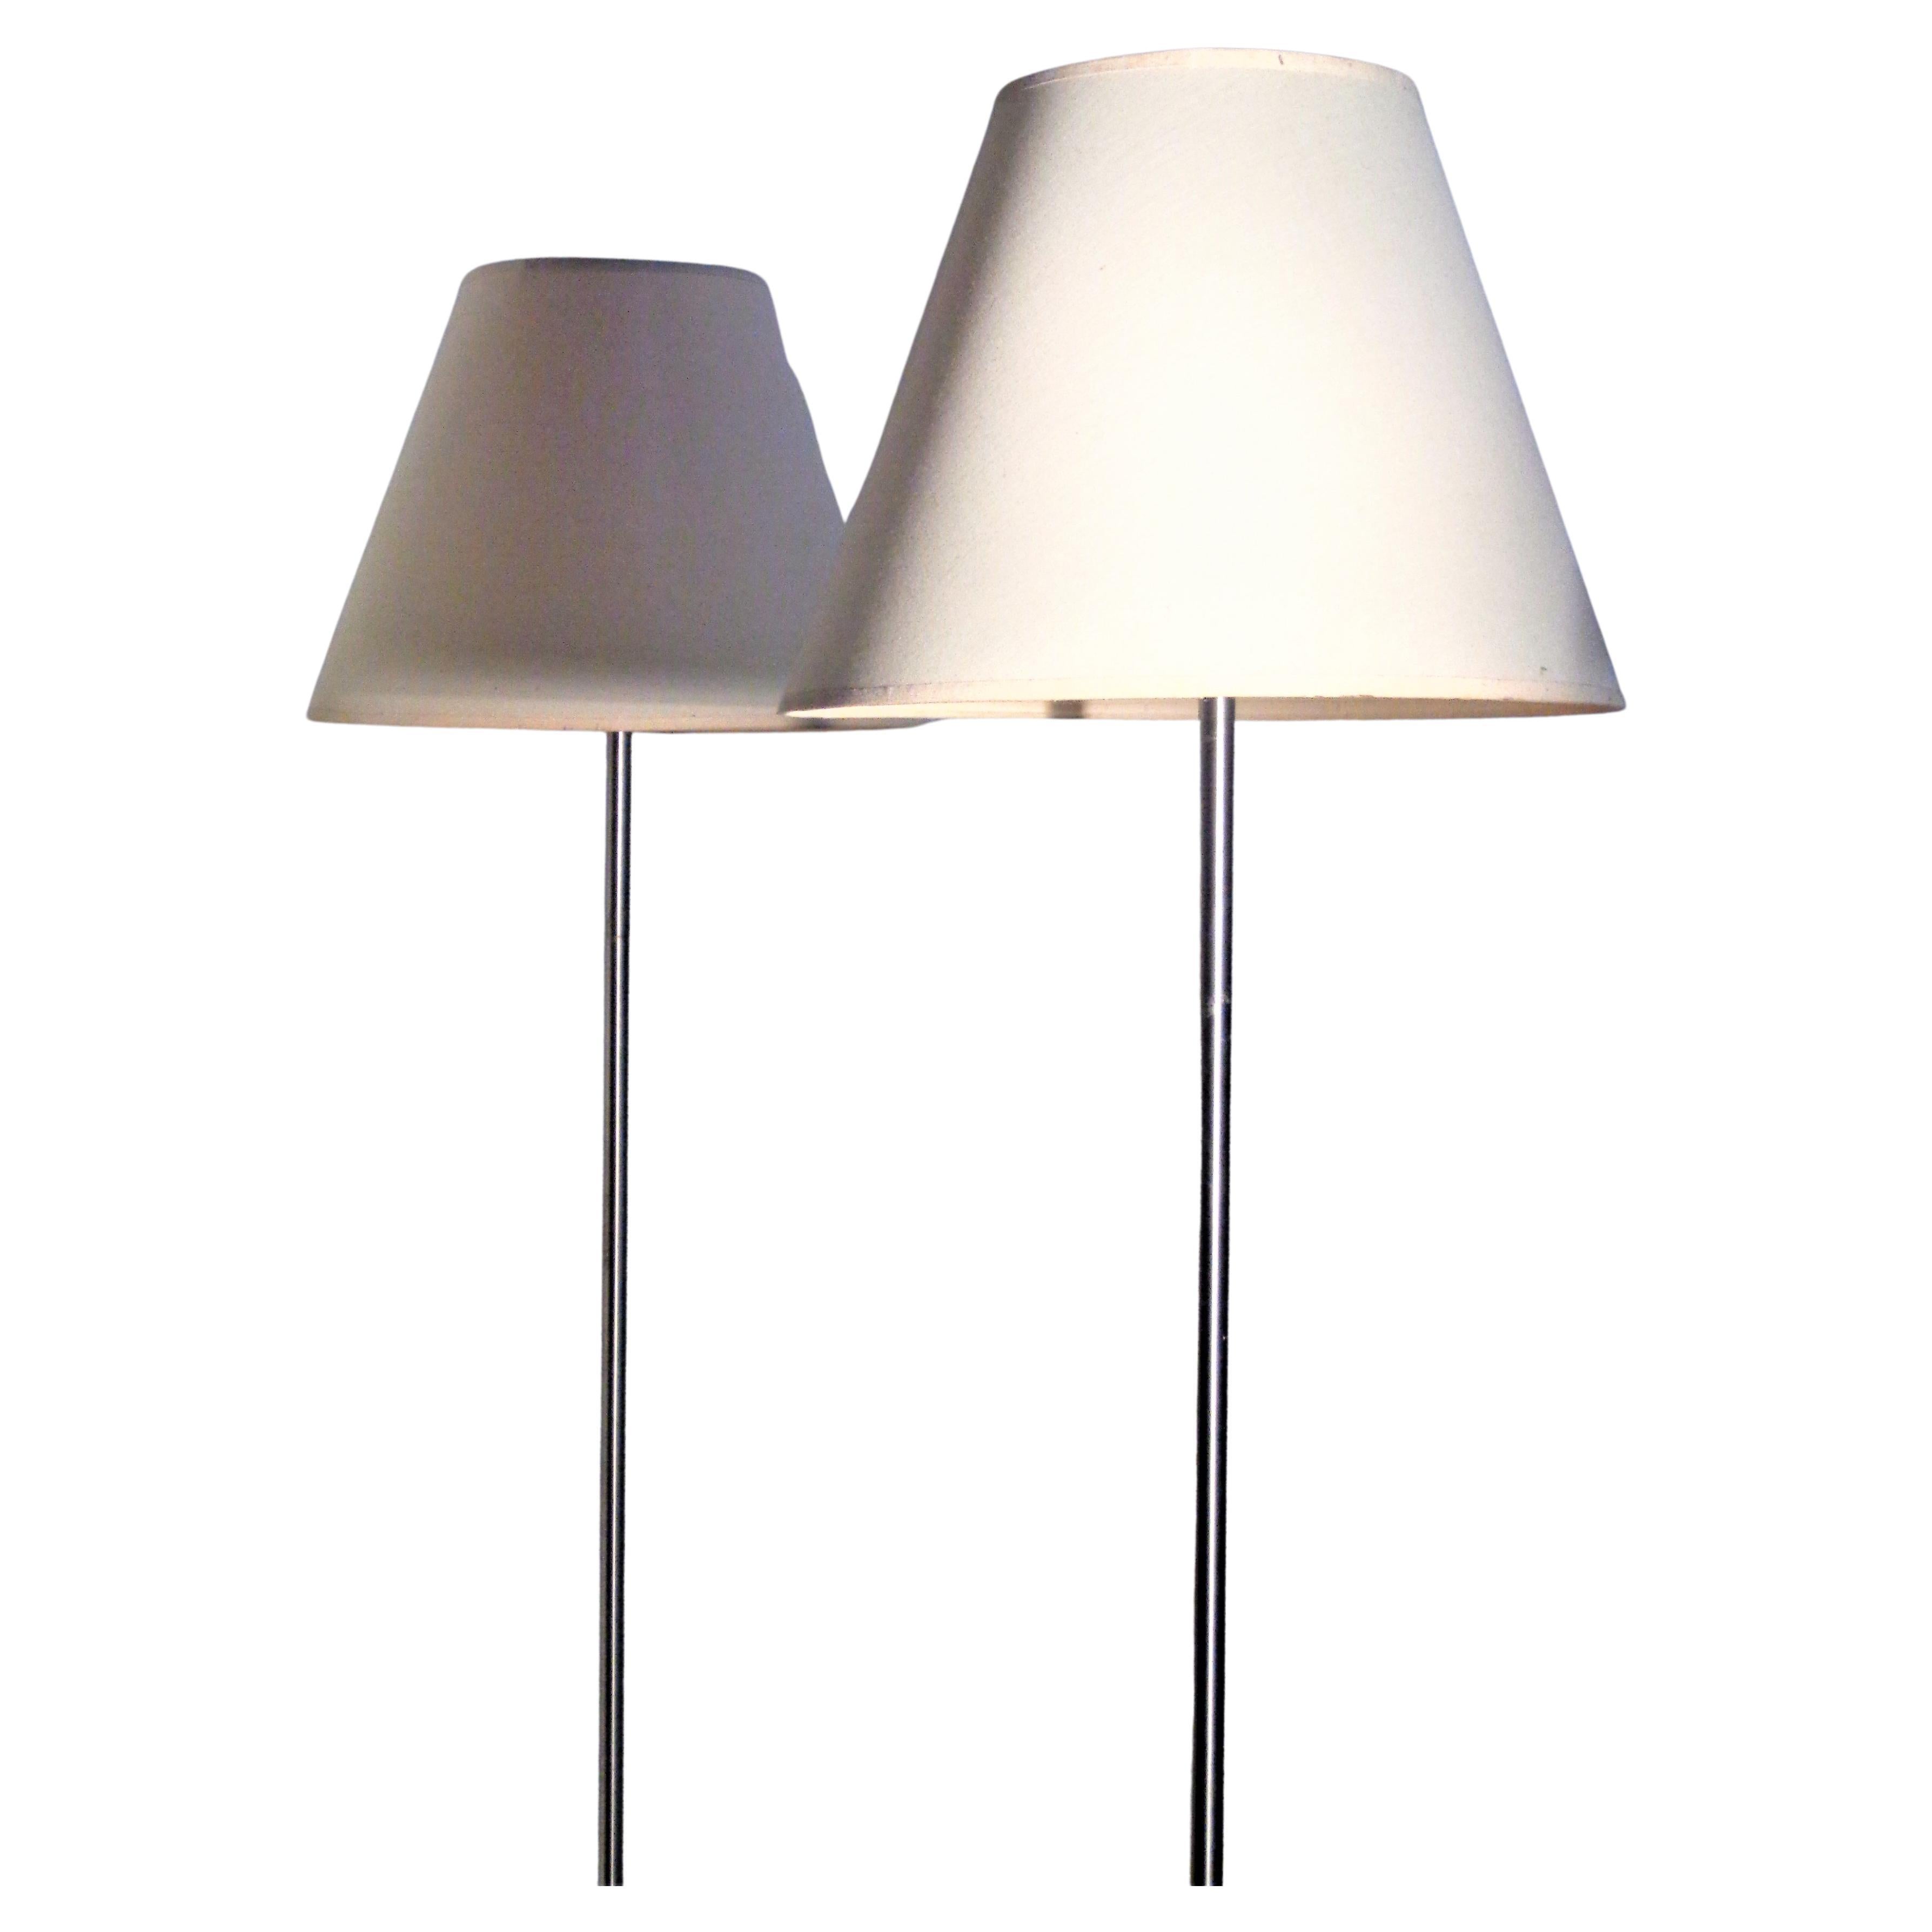 Matching pair of minimalist designed tulip base nickel metal floor lamps by Laurel Lamp Company w/ the original cylindrical nickel finials and cloth shades. Overall very good vintage condition. Circa 1960. Look at all pictures and read condition